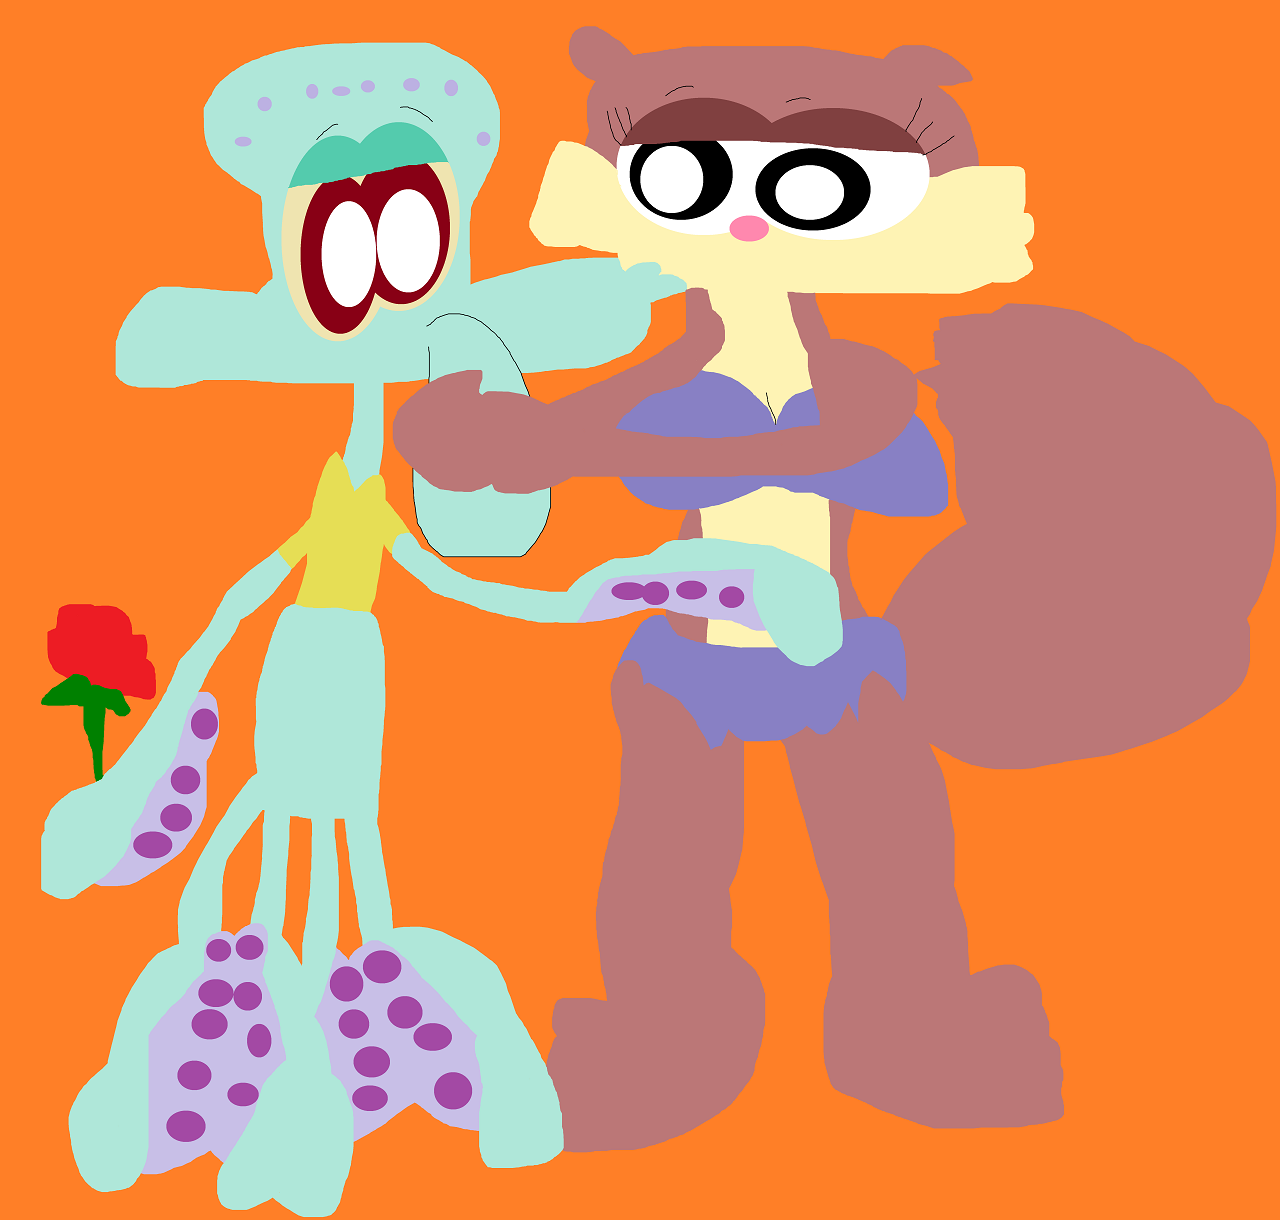 Just A Kiss Between Squidward And Sandy by Falconlobo